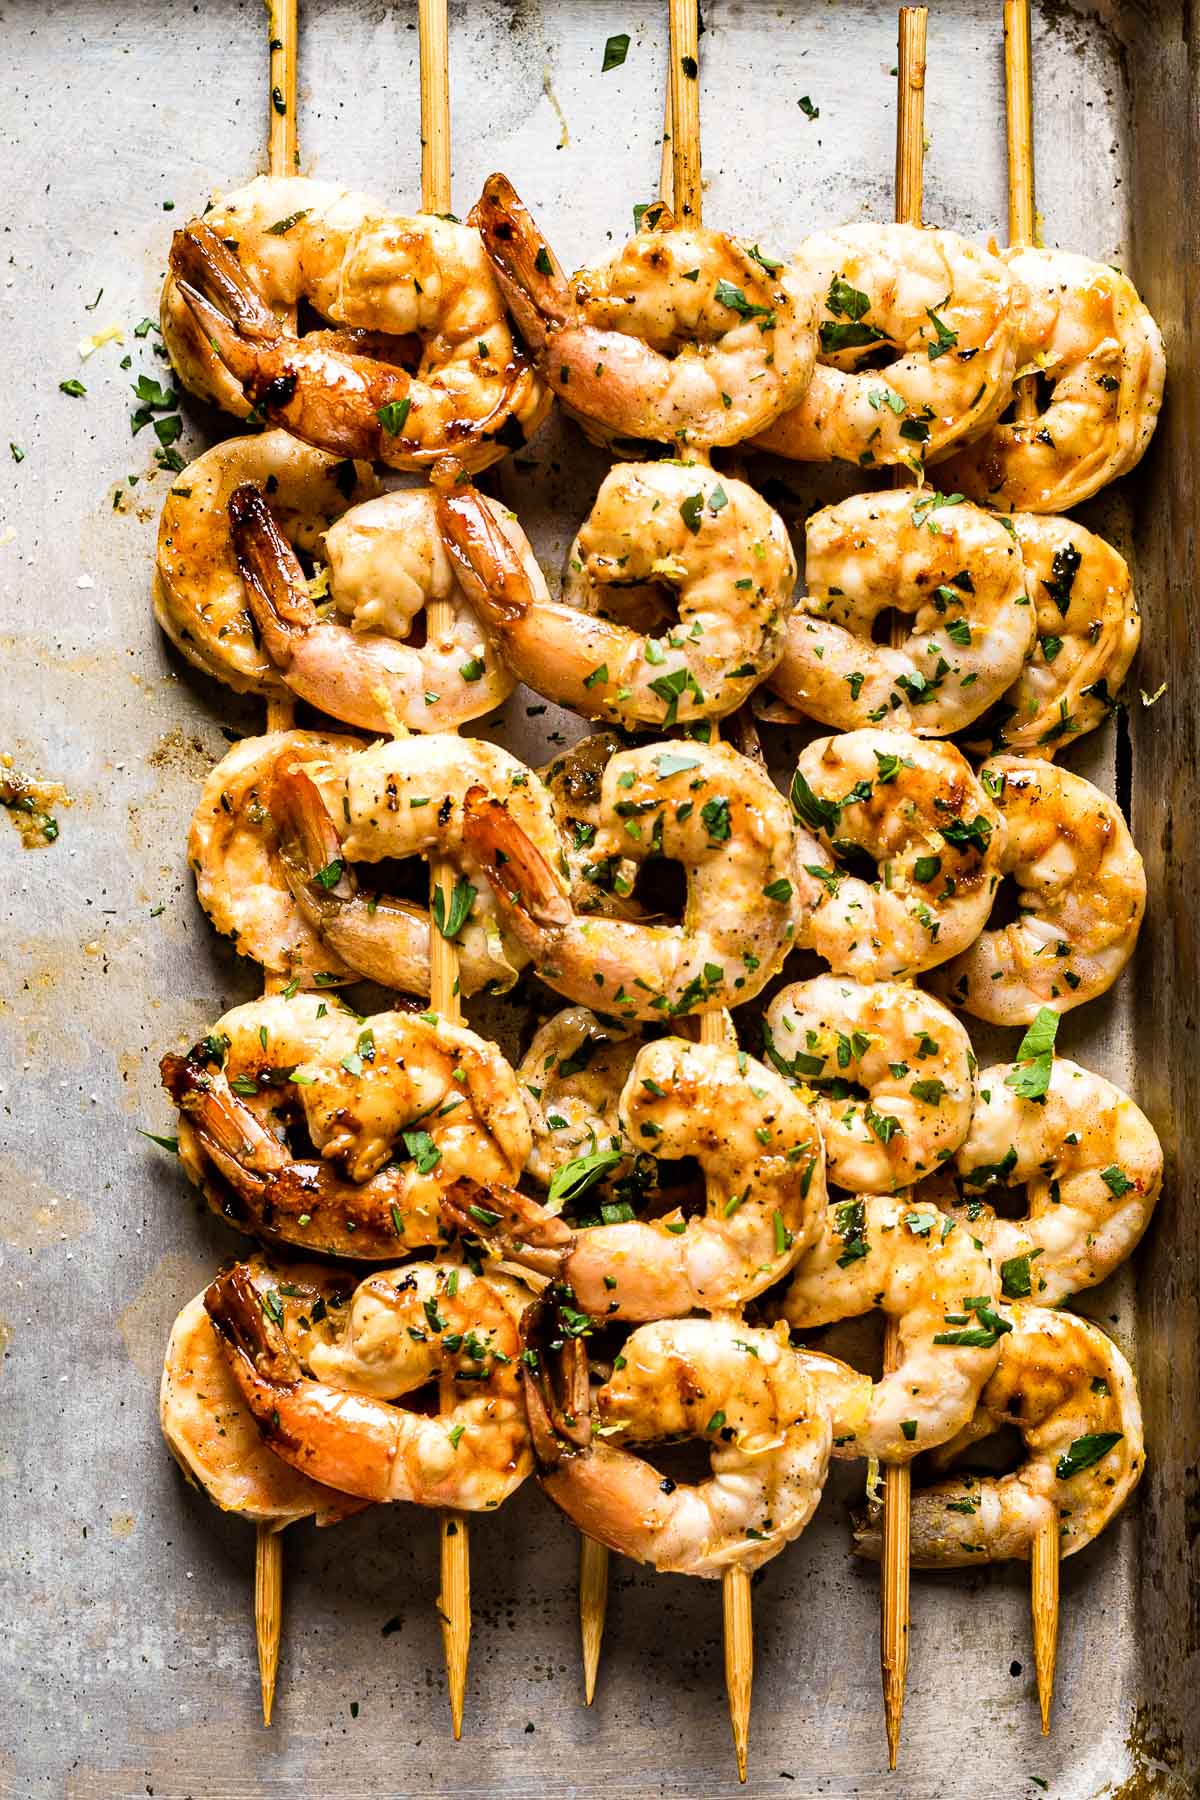 Marinated prawn on a baking sheet from the top view